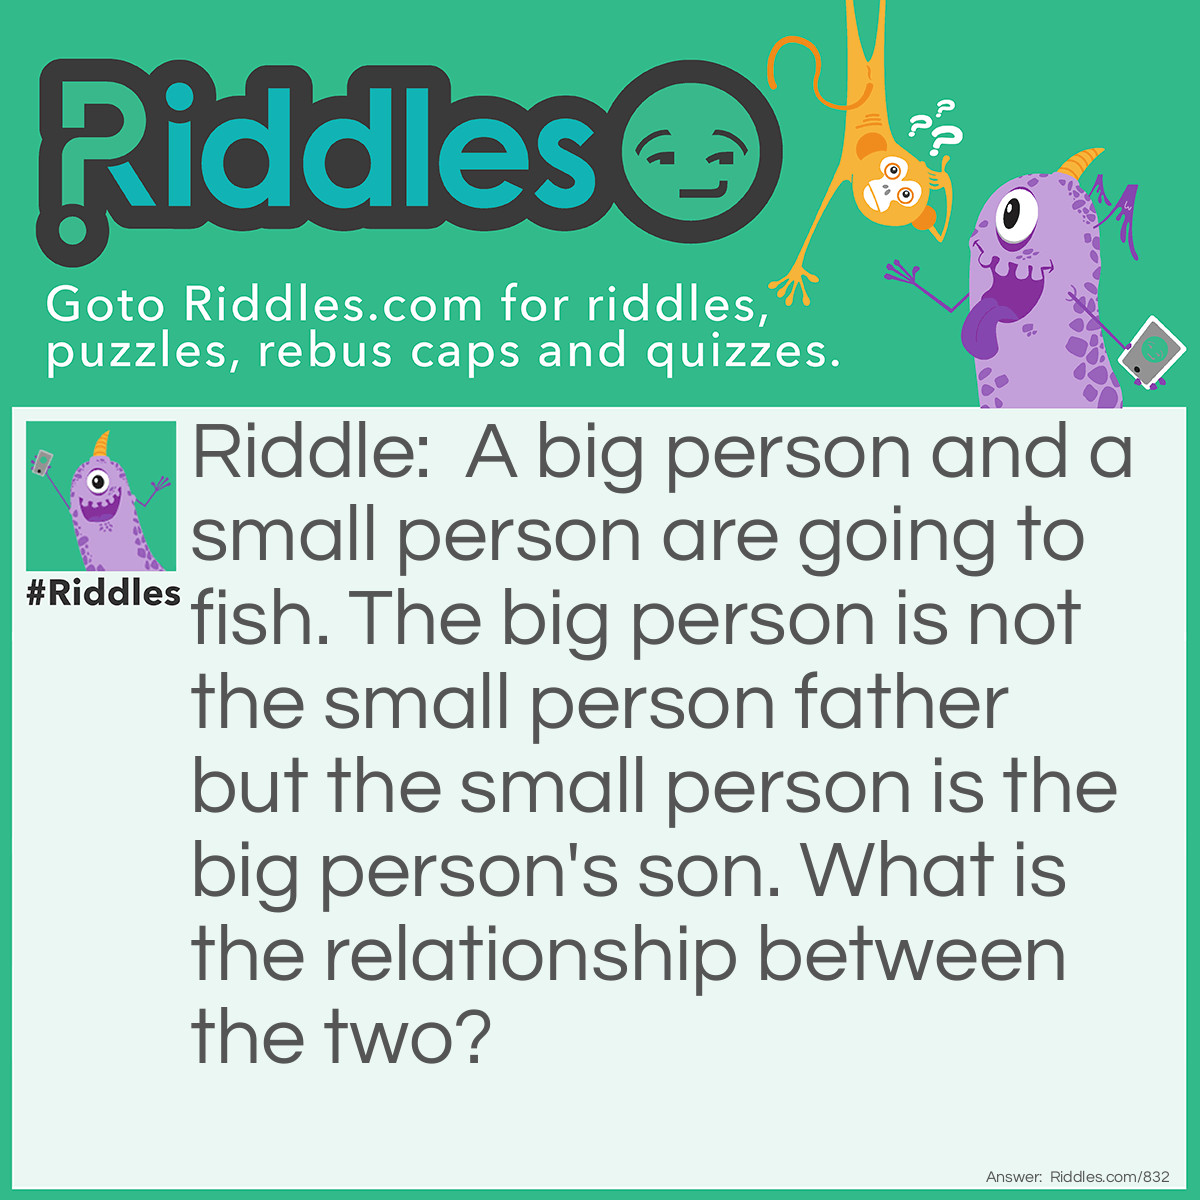 Riddle: A big person and a small person are going to fish. The big person is not the small person's father but the small person is the big person's son. What is the relationship between the two? Answer: The big person is the small person's mother.